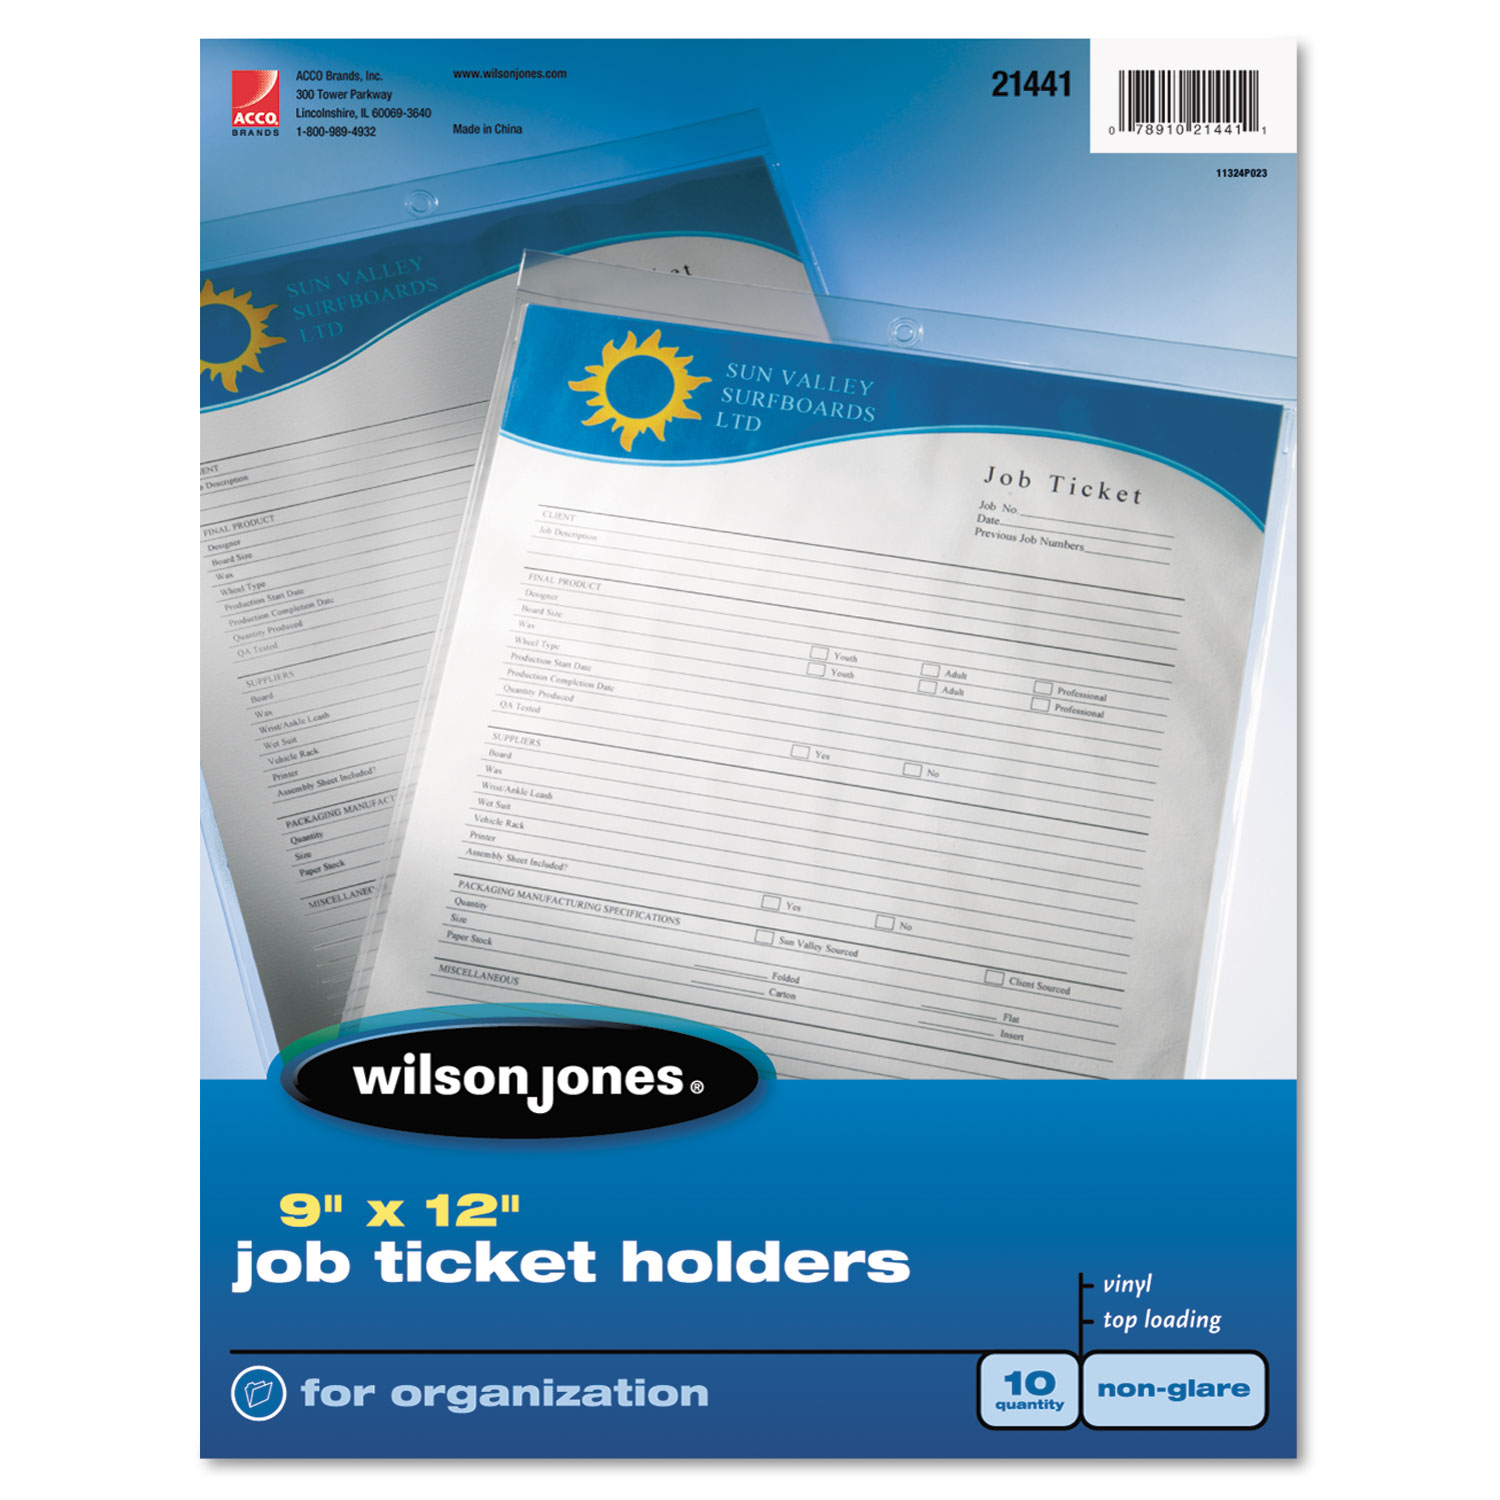  Wilson Jones W21441 Top-Loading Job Ticket Holder, Nonglare Finish, 9 x 12, Clear/Frosted, 10/Pack (WLJ21441) 